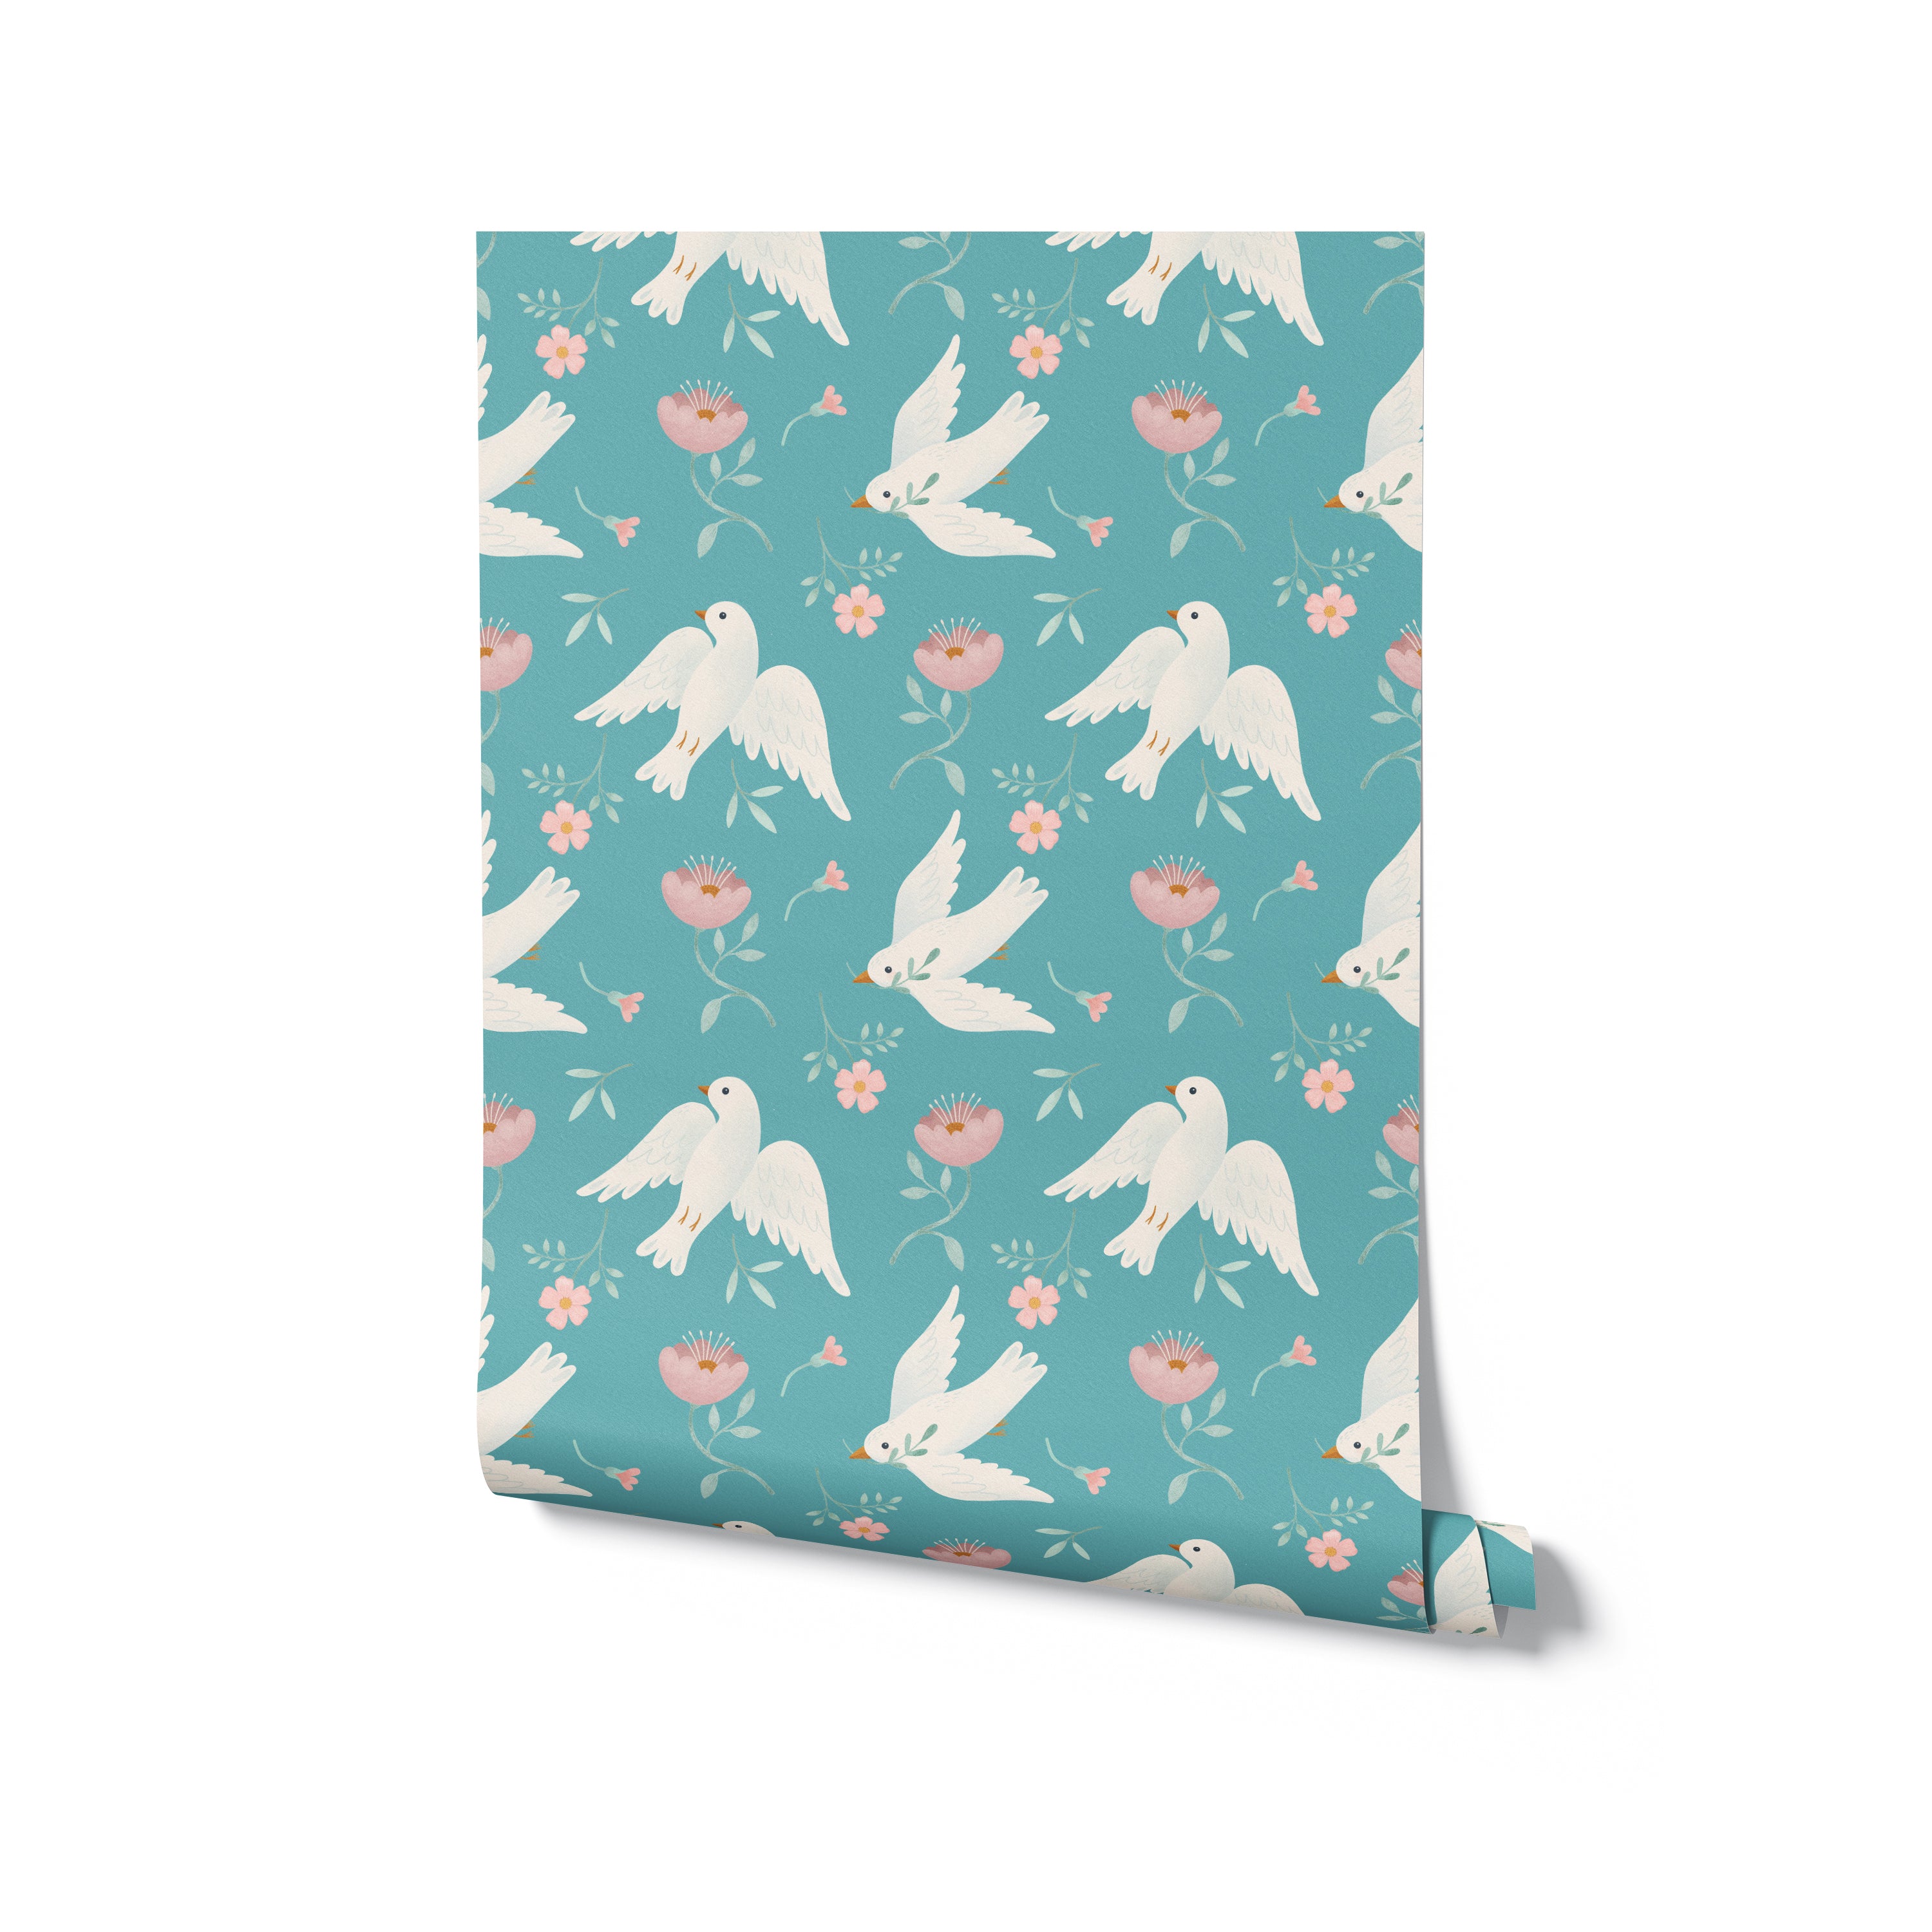 Close-up of Singing Birds Wallpaper roll showing detailed illustrations of white doves surrounded by pink flowers and green leaves on a teal background, ideal for serene home decor